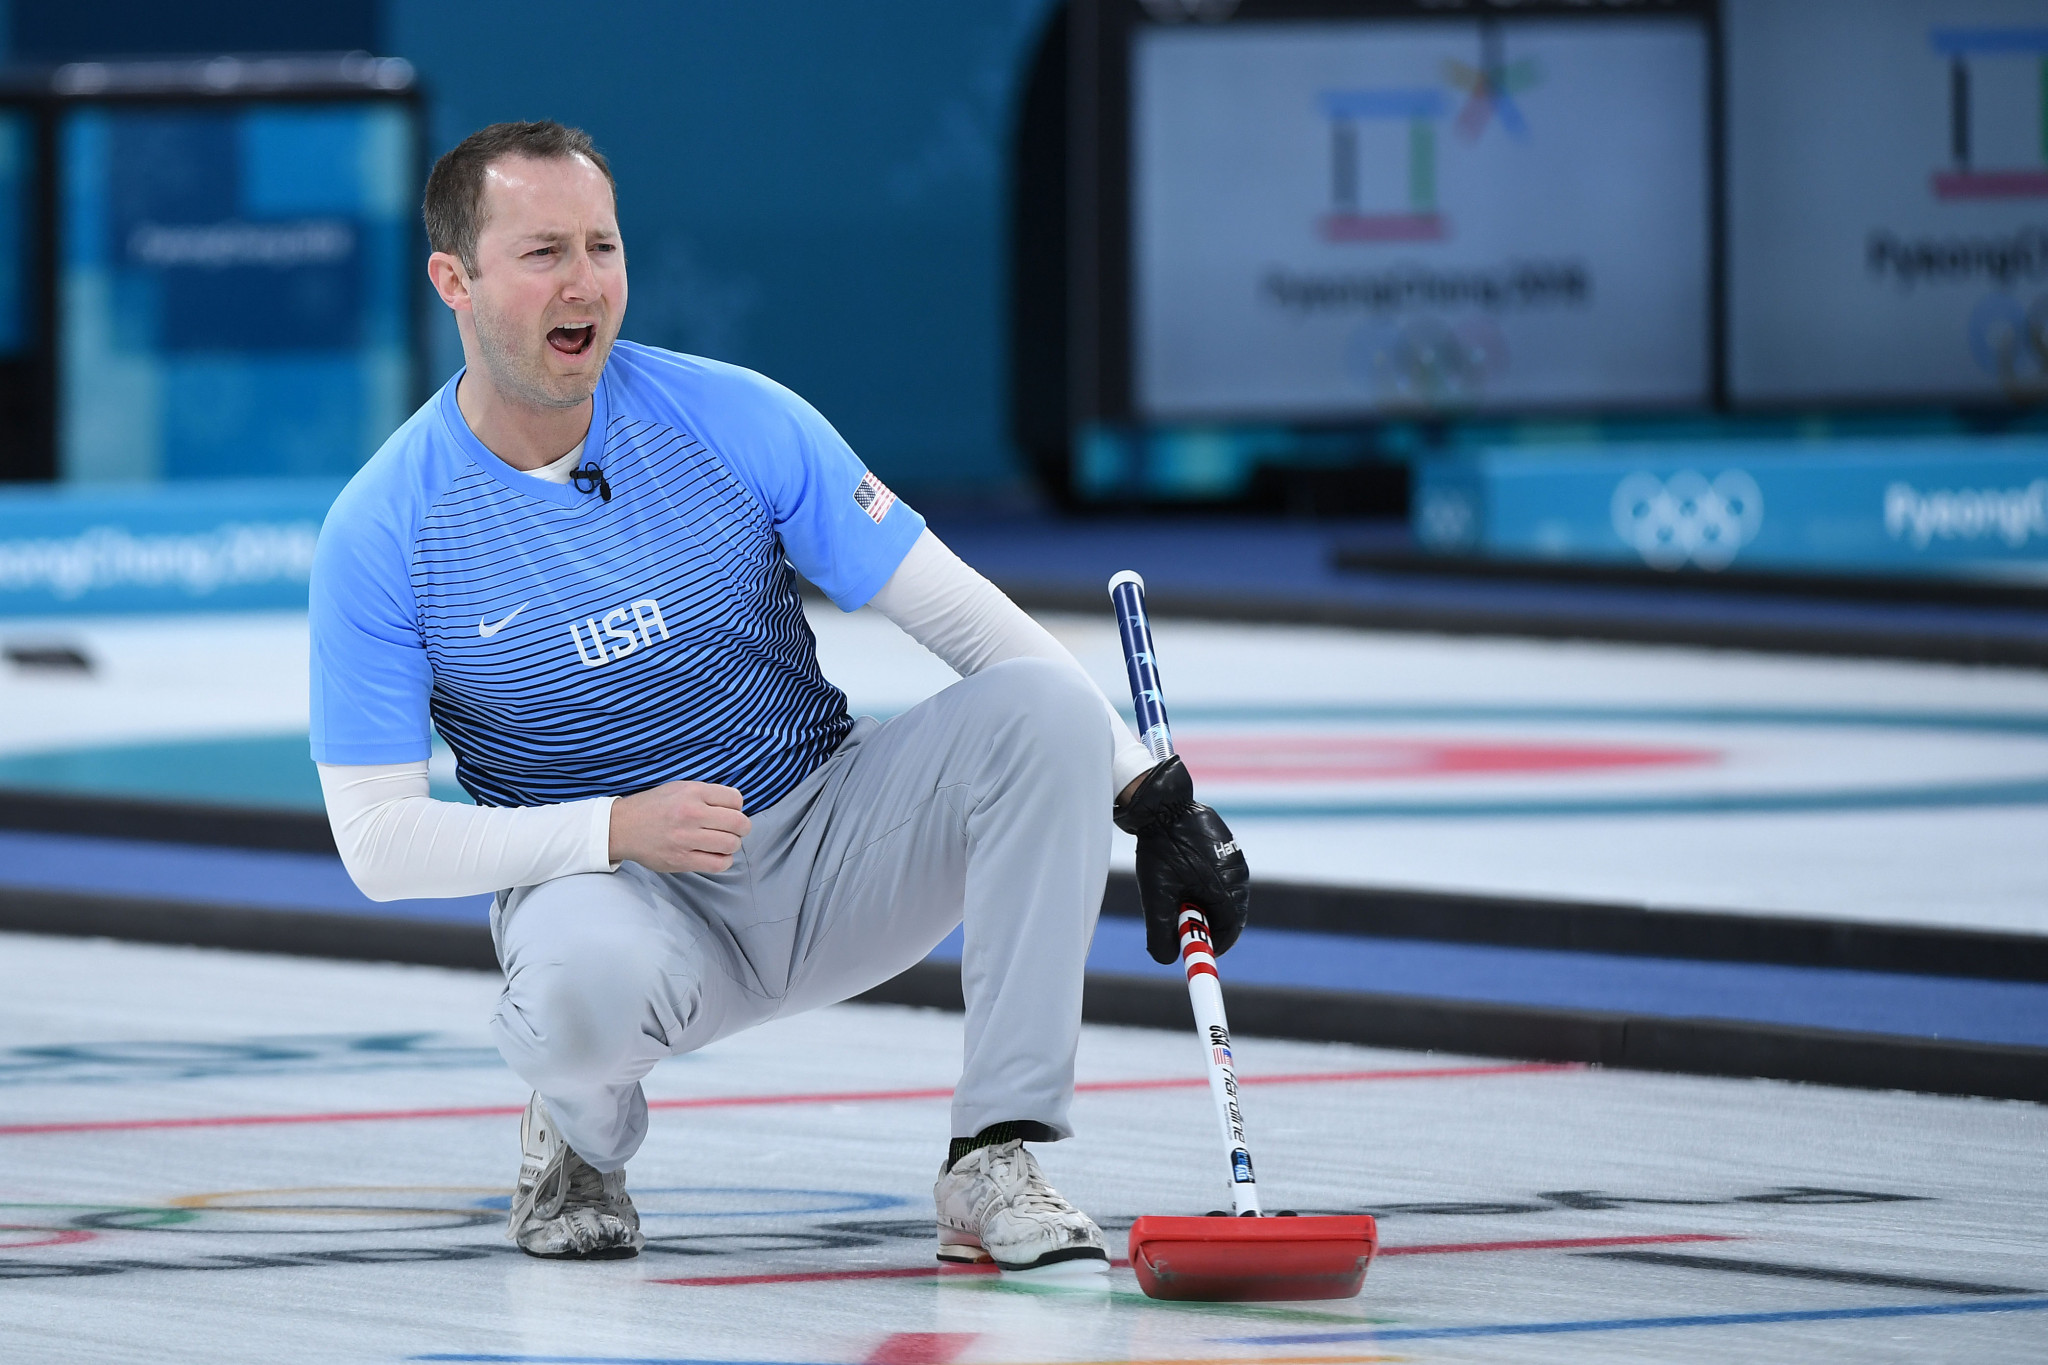 Four members added to World Curling Athletes Commission